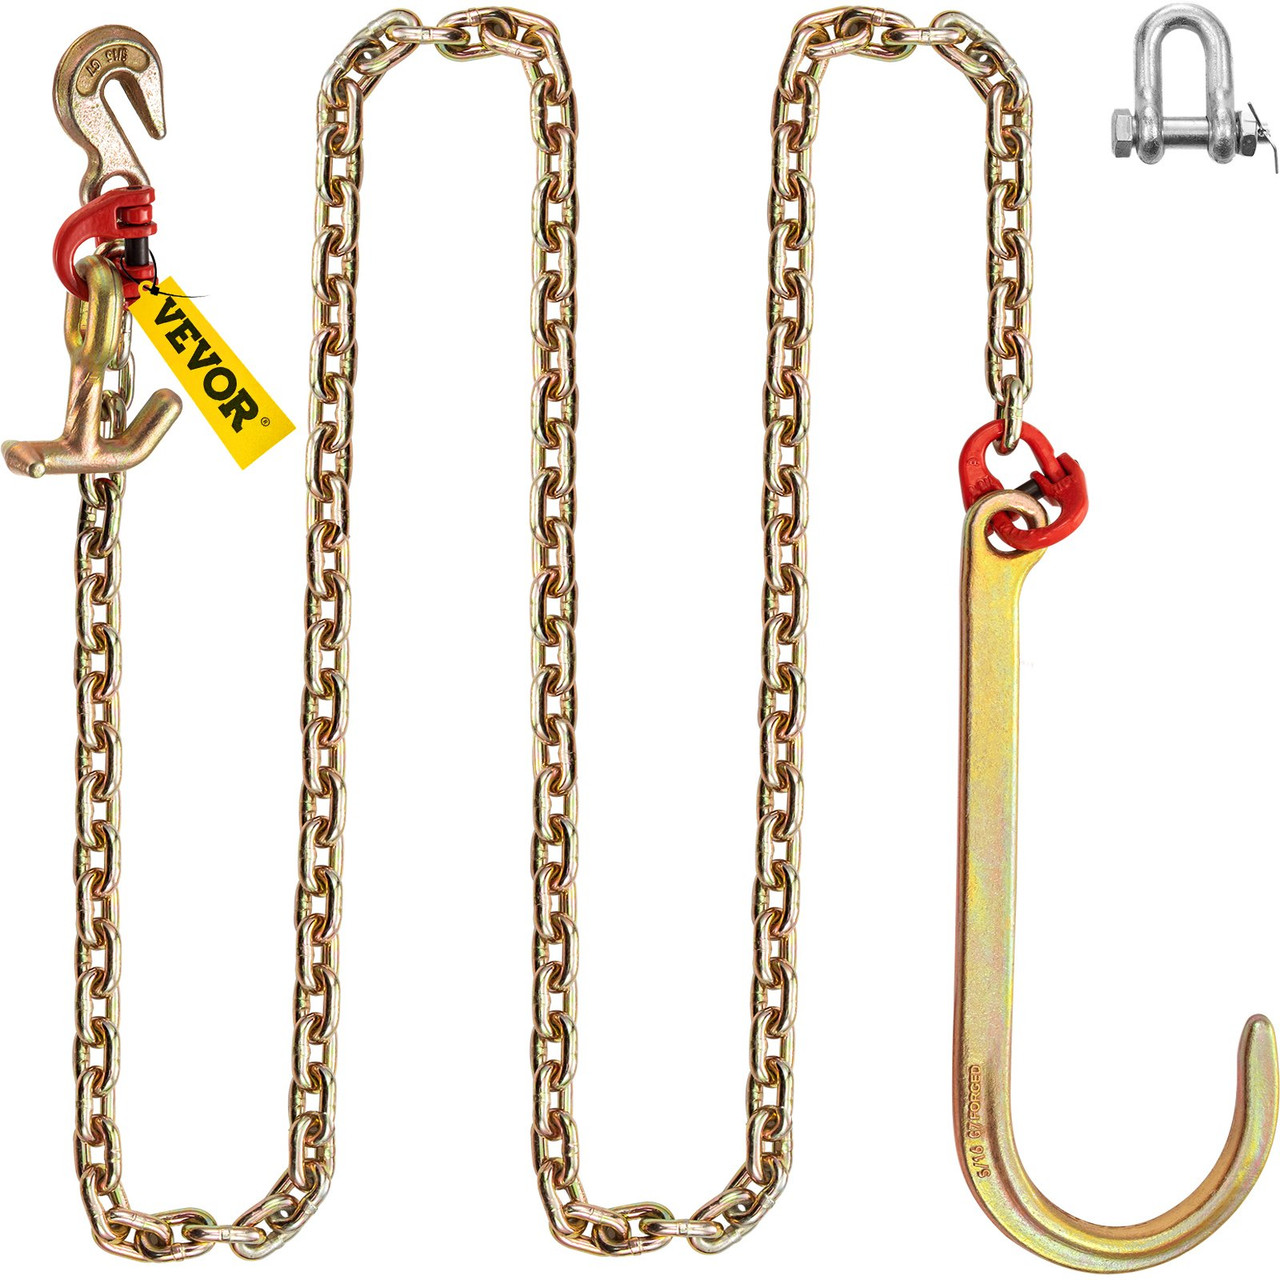 J Hook Chain, 5/16 in x 10 ft Bridle Tow Chain, Grade 80 Bridle Transport  Chain, Alloy Steel Chain with J Hook, Safe J Hooks Towing Strap, 9260 Lbs